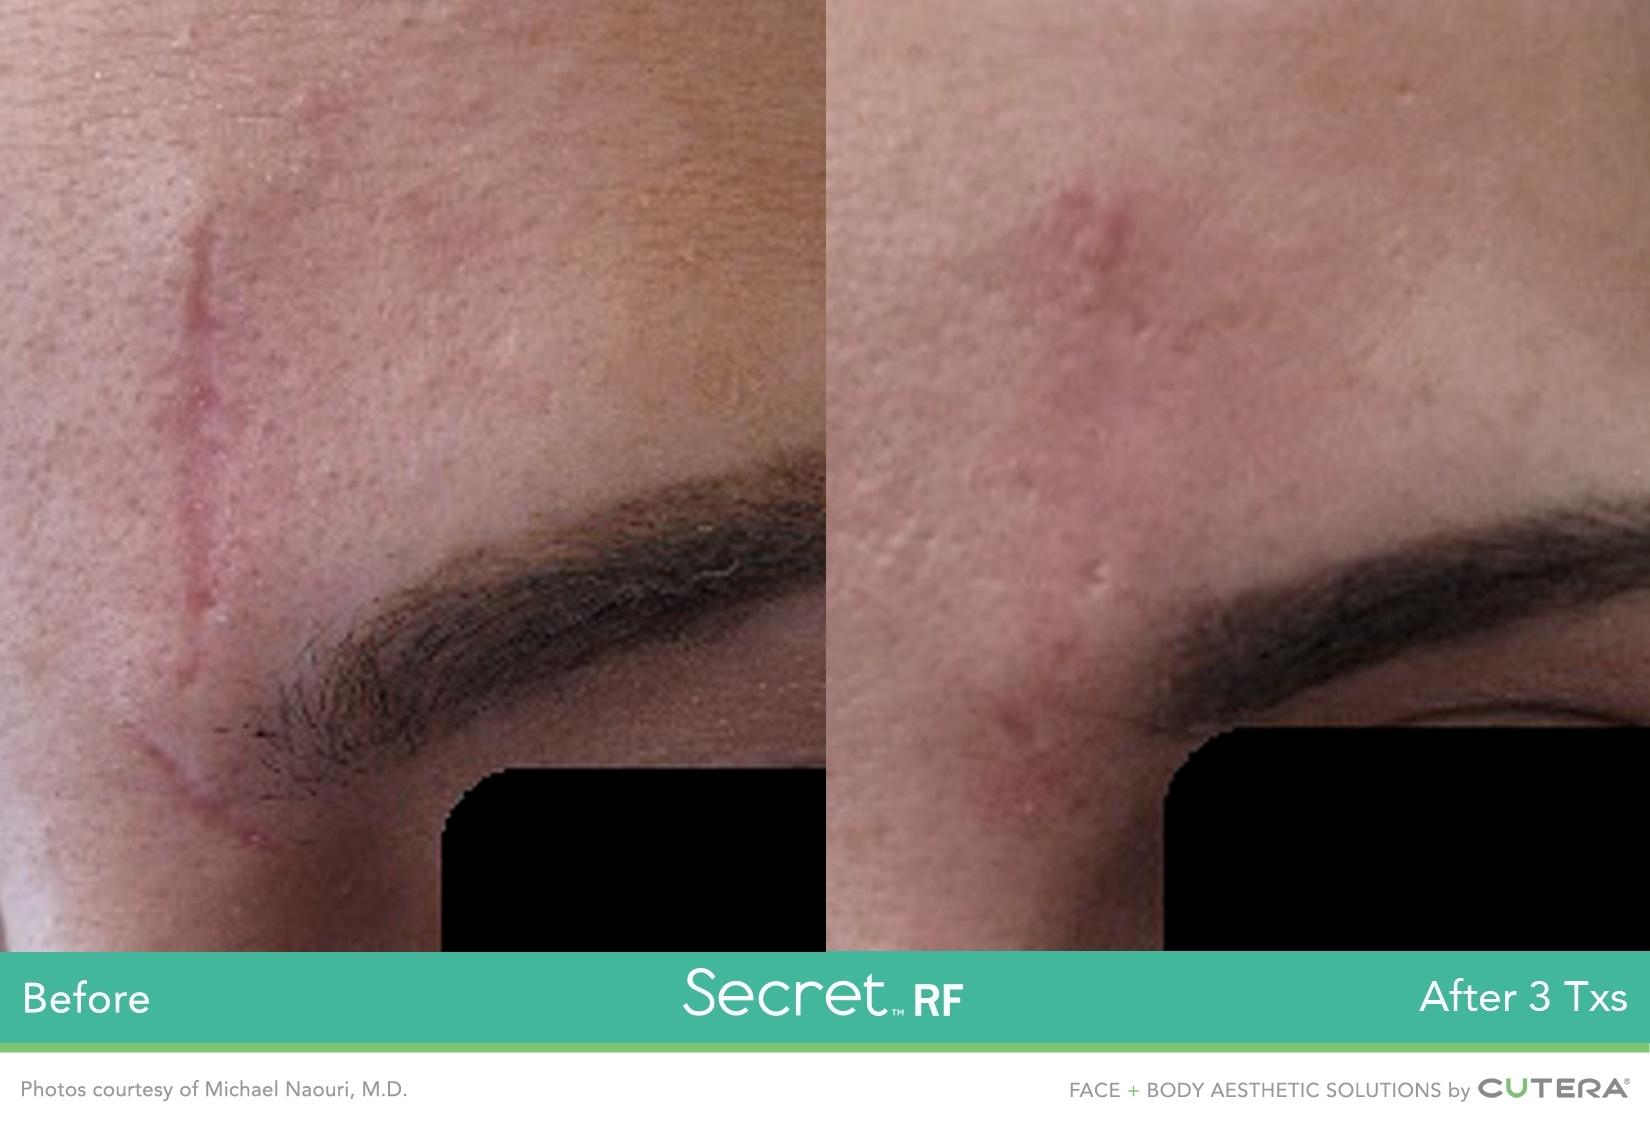 Secret RF: Patient 4 - Before and After 1